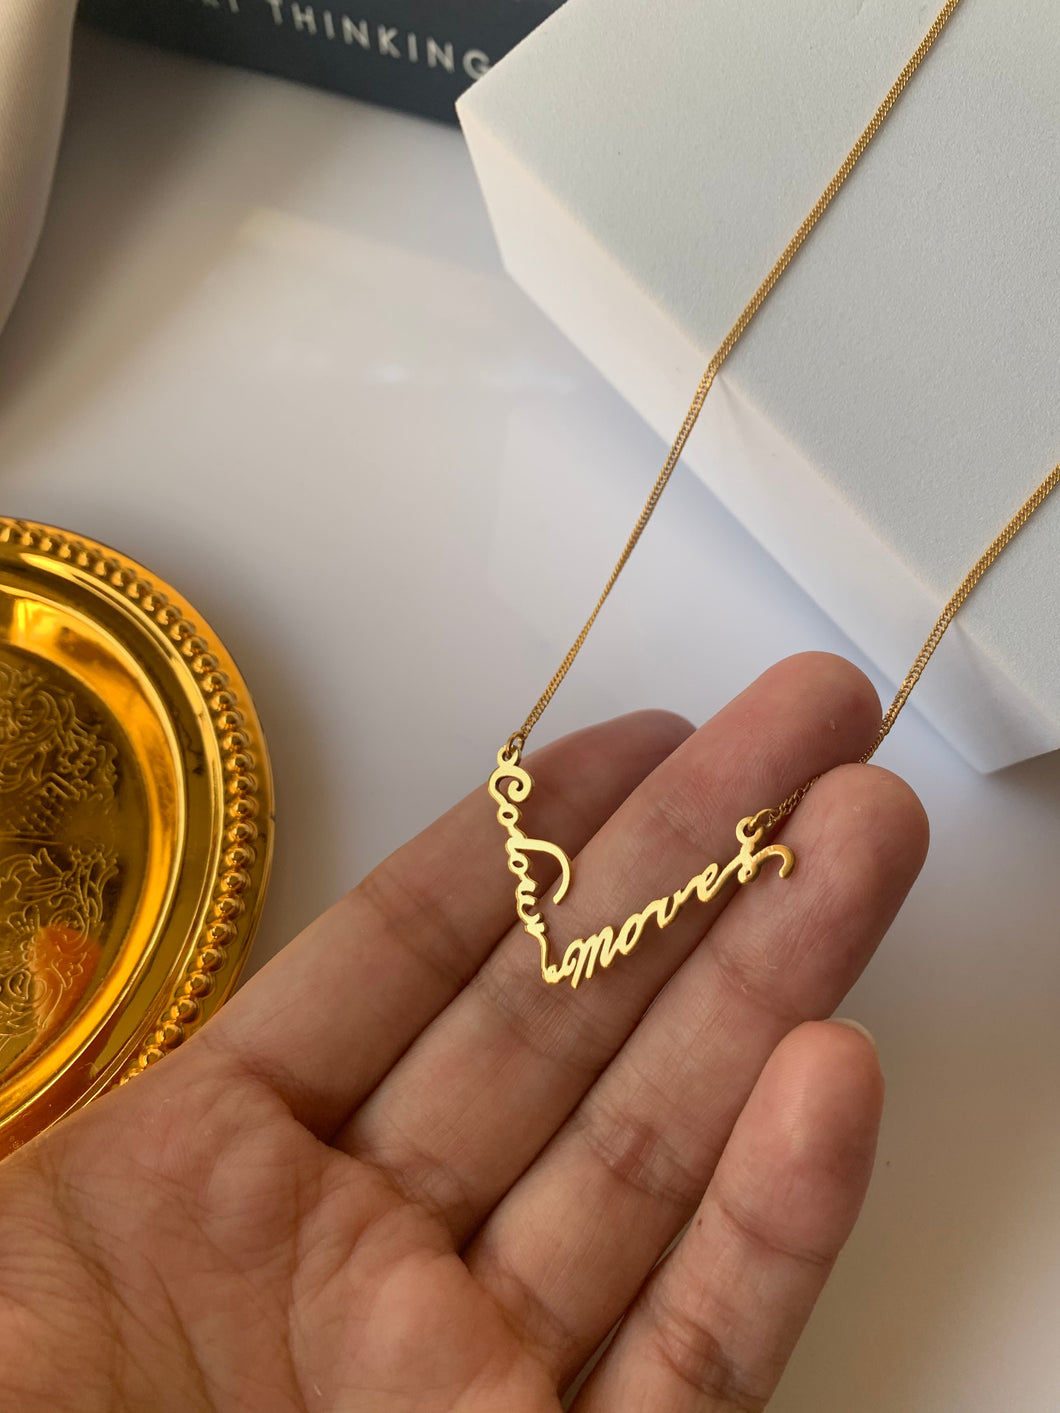 Customized name necklace in V shape. Set in 18k yellow gold.